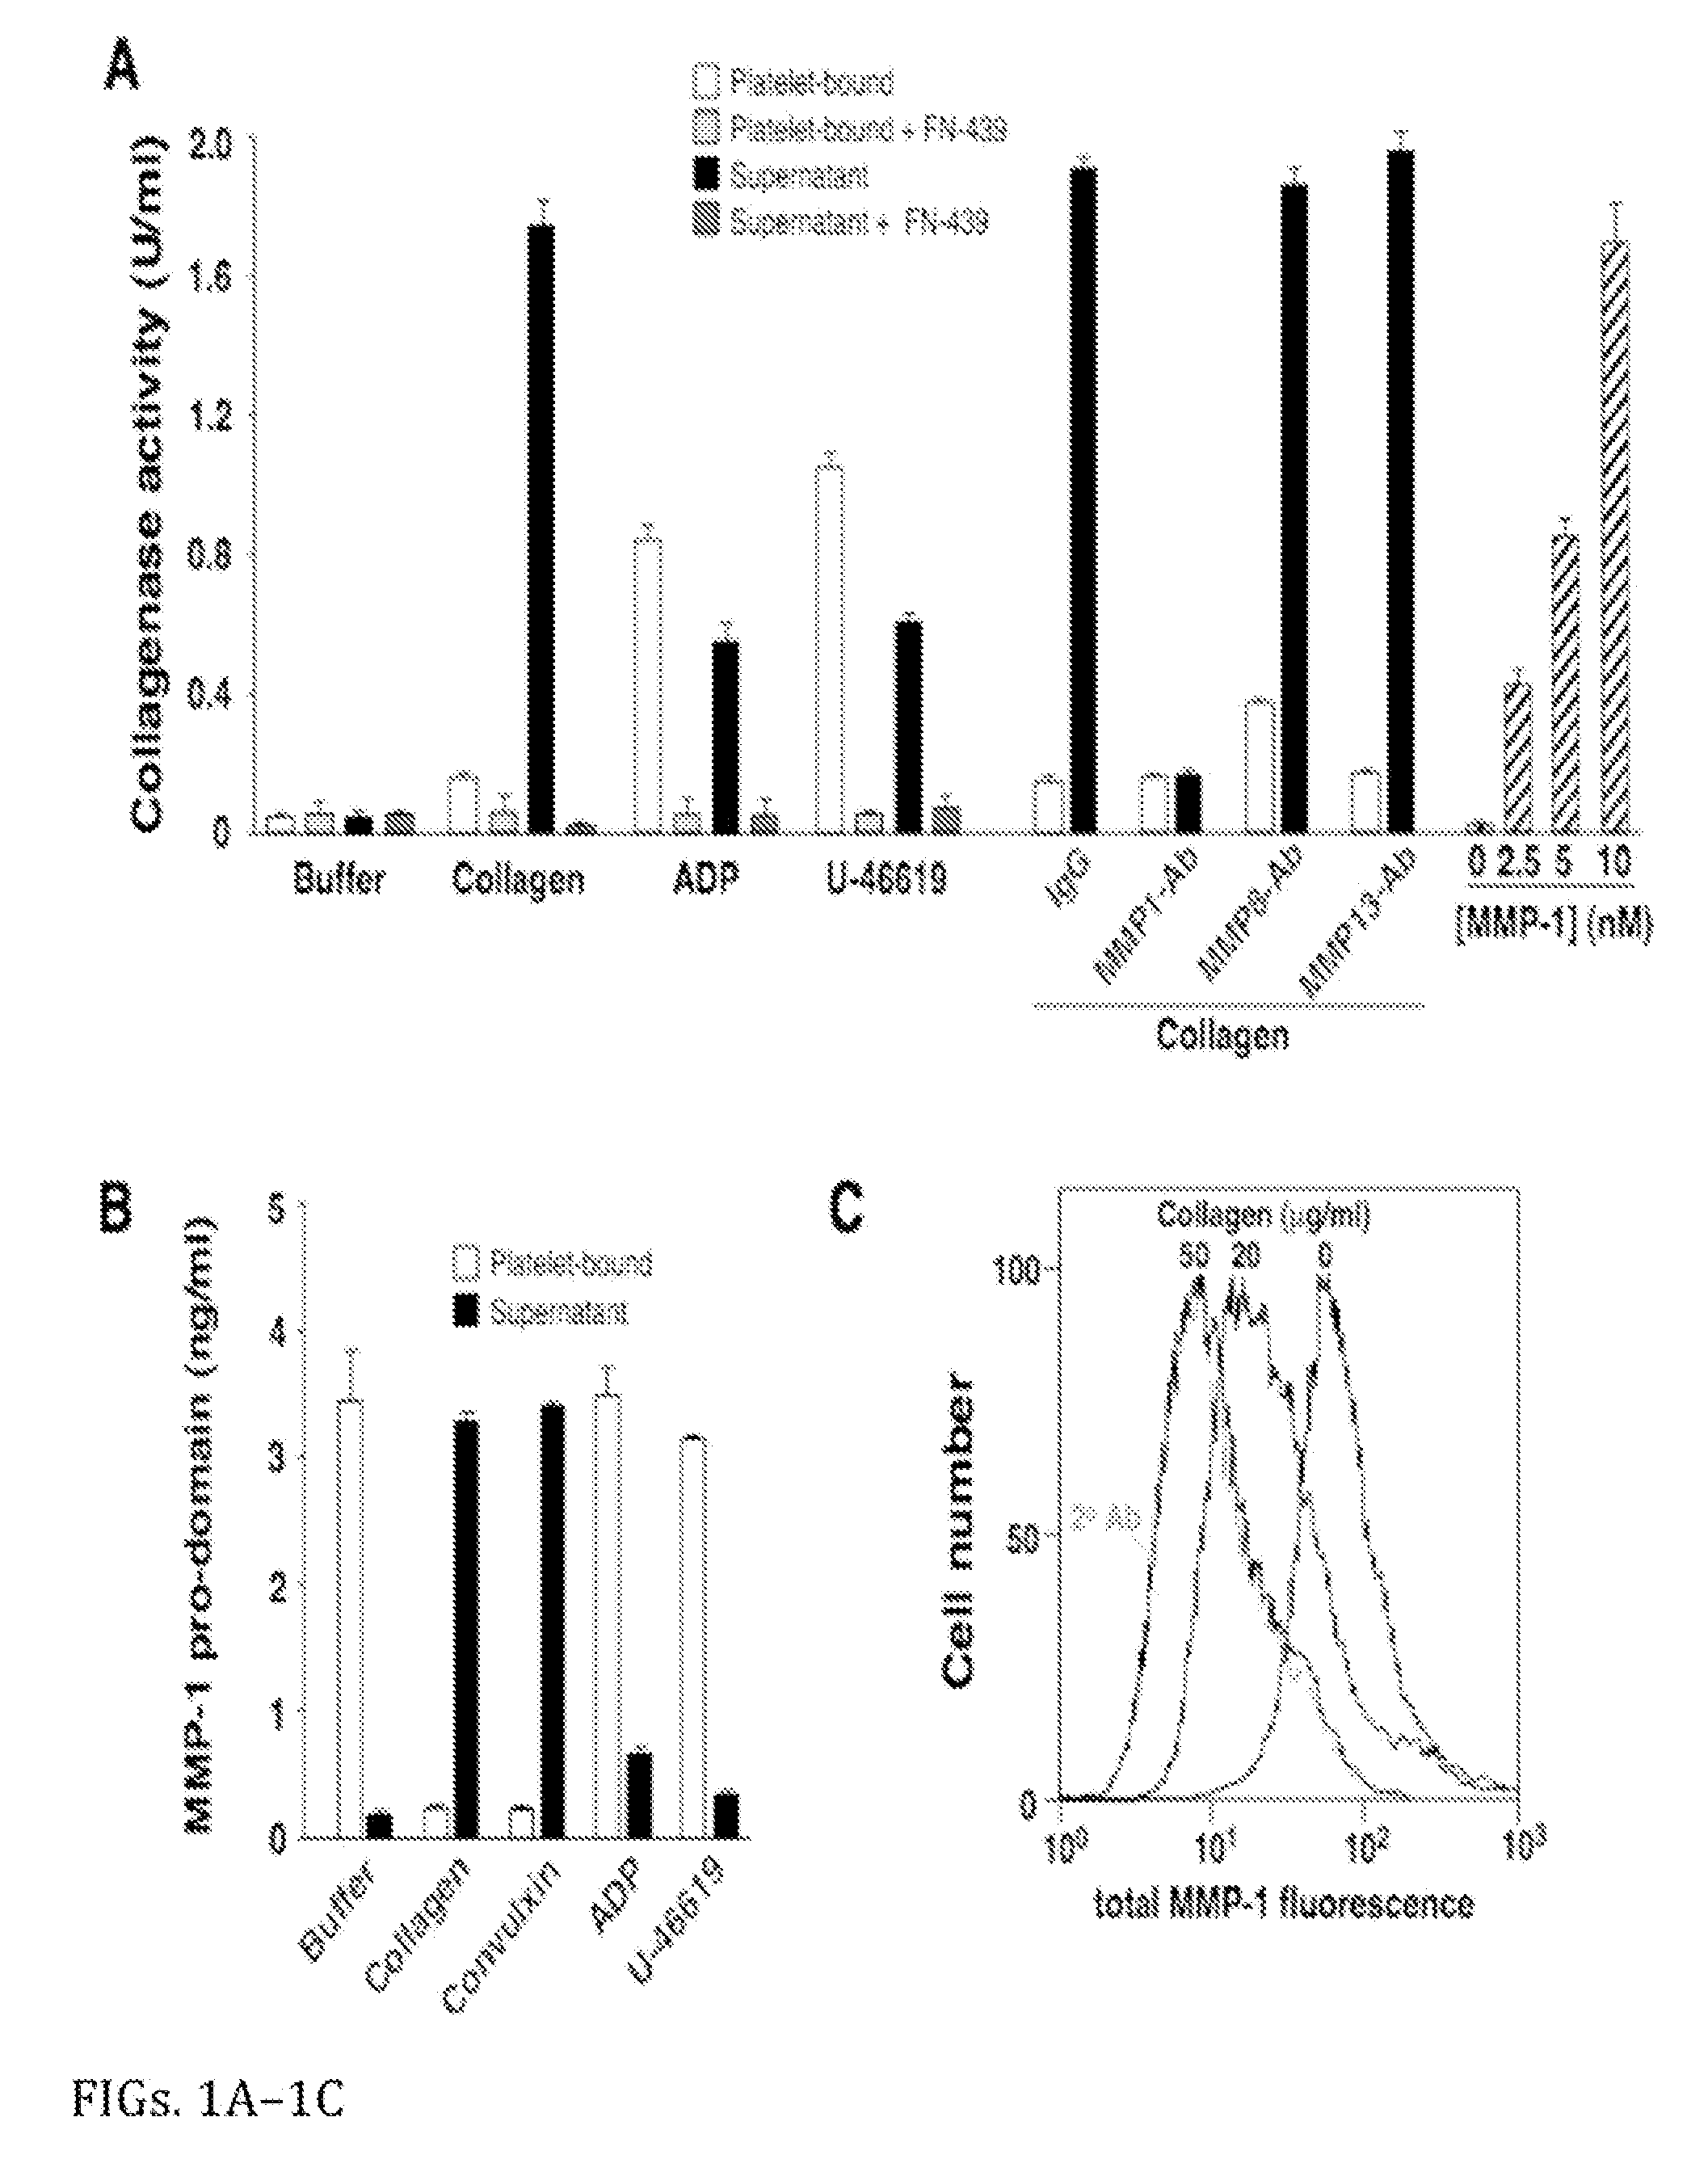 PAR-1 Activation by Metalloproteinase-1 (MMP-1)